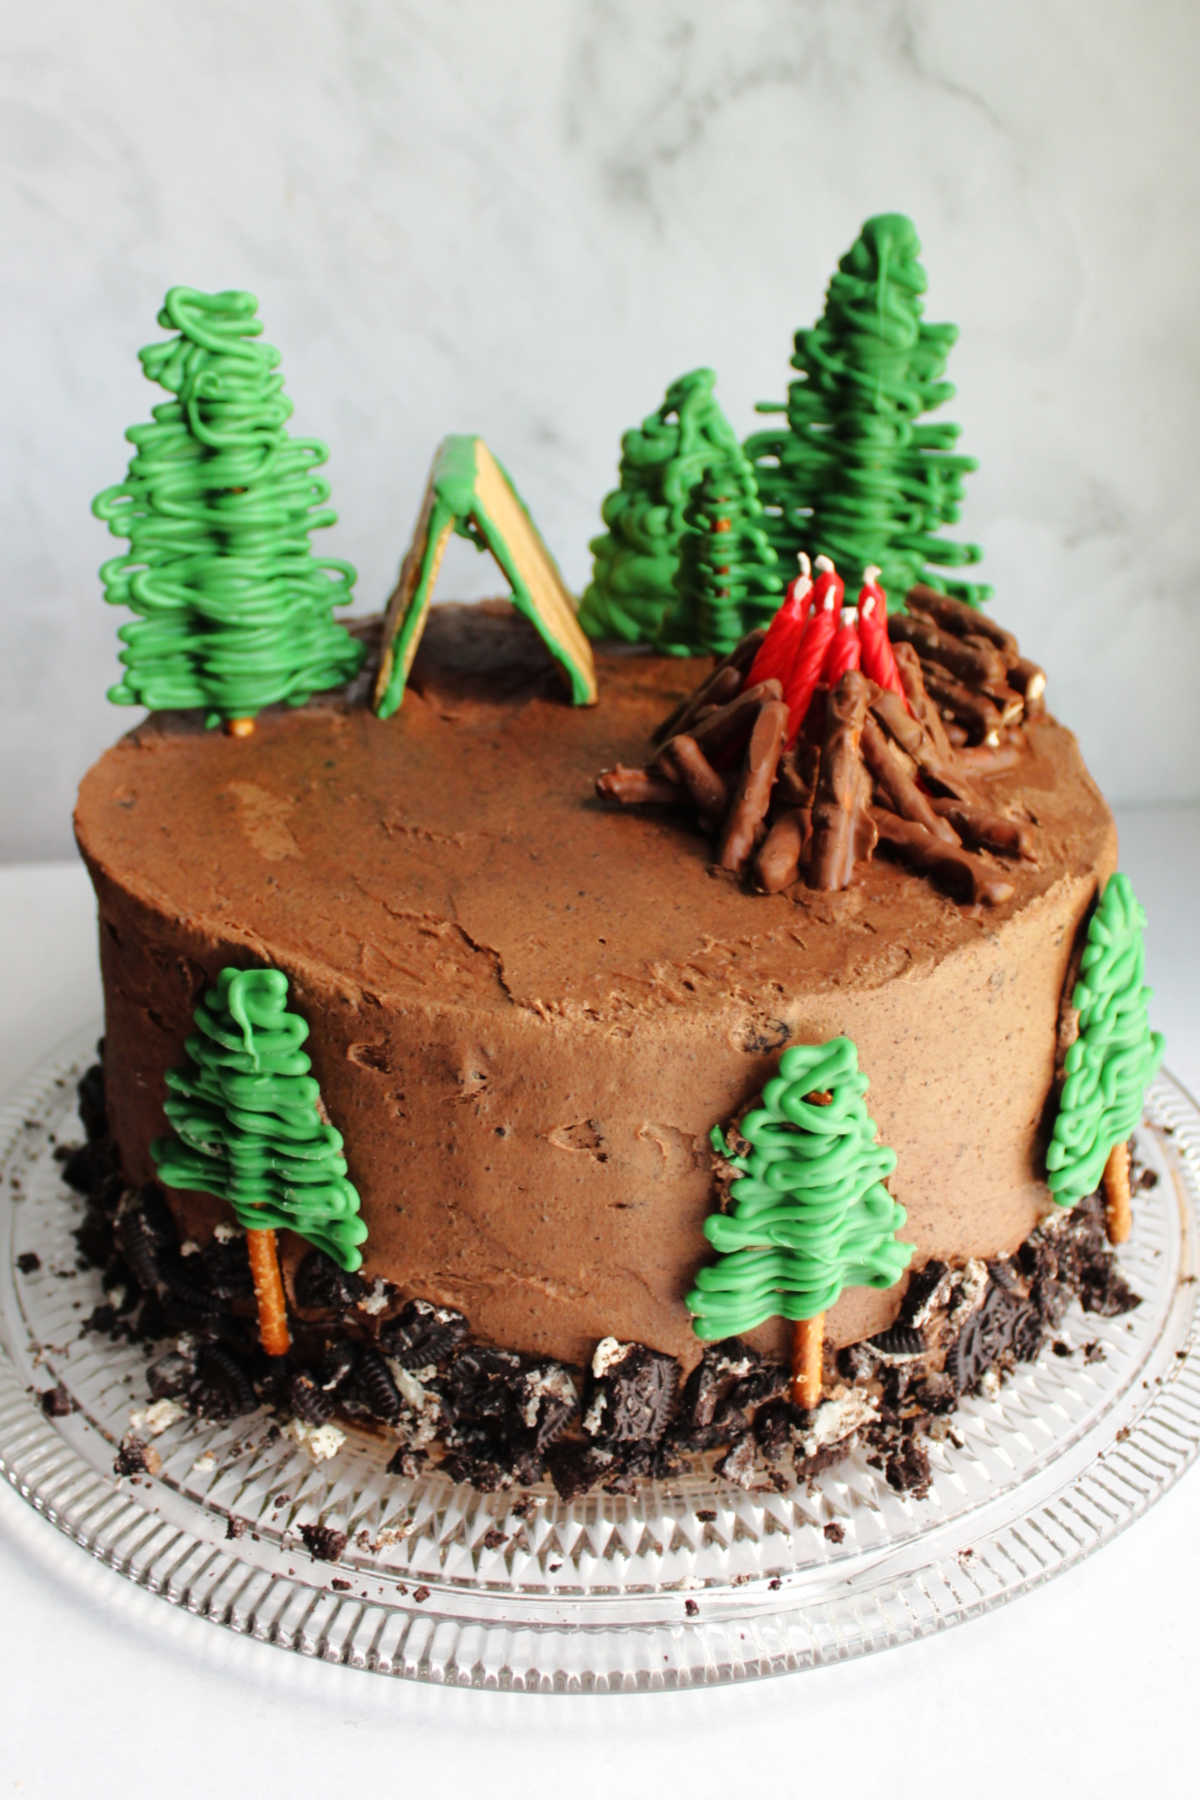 Camping cake made with cookies and cream cake coated with chocolate Oreo frosting and camping decorations